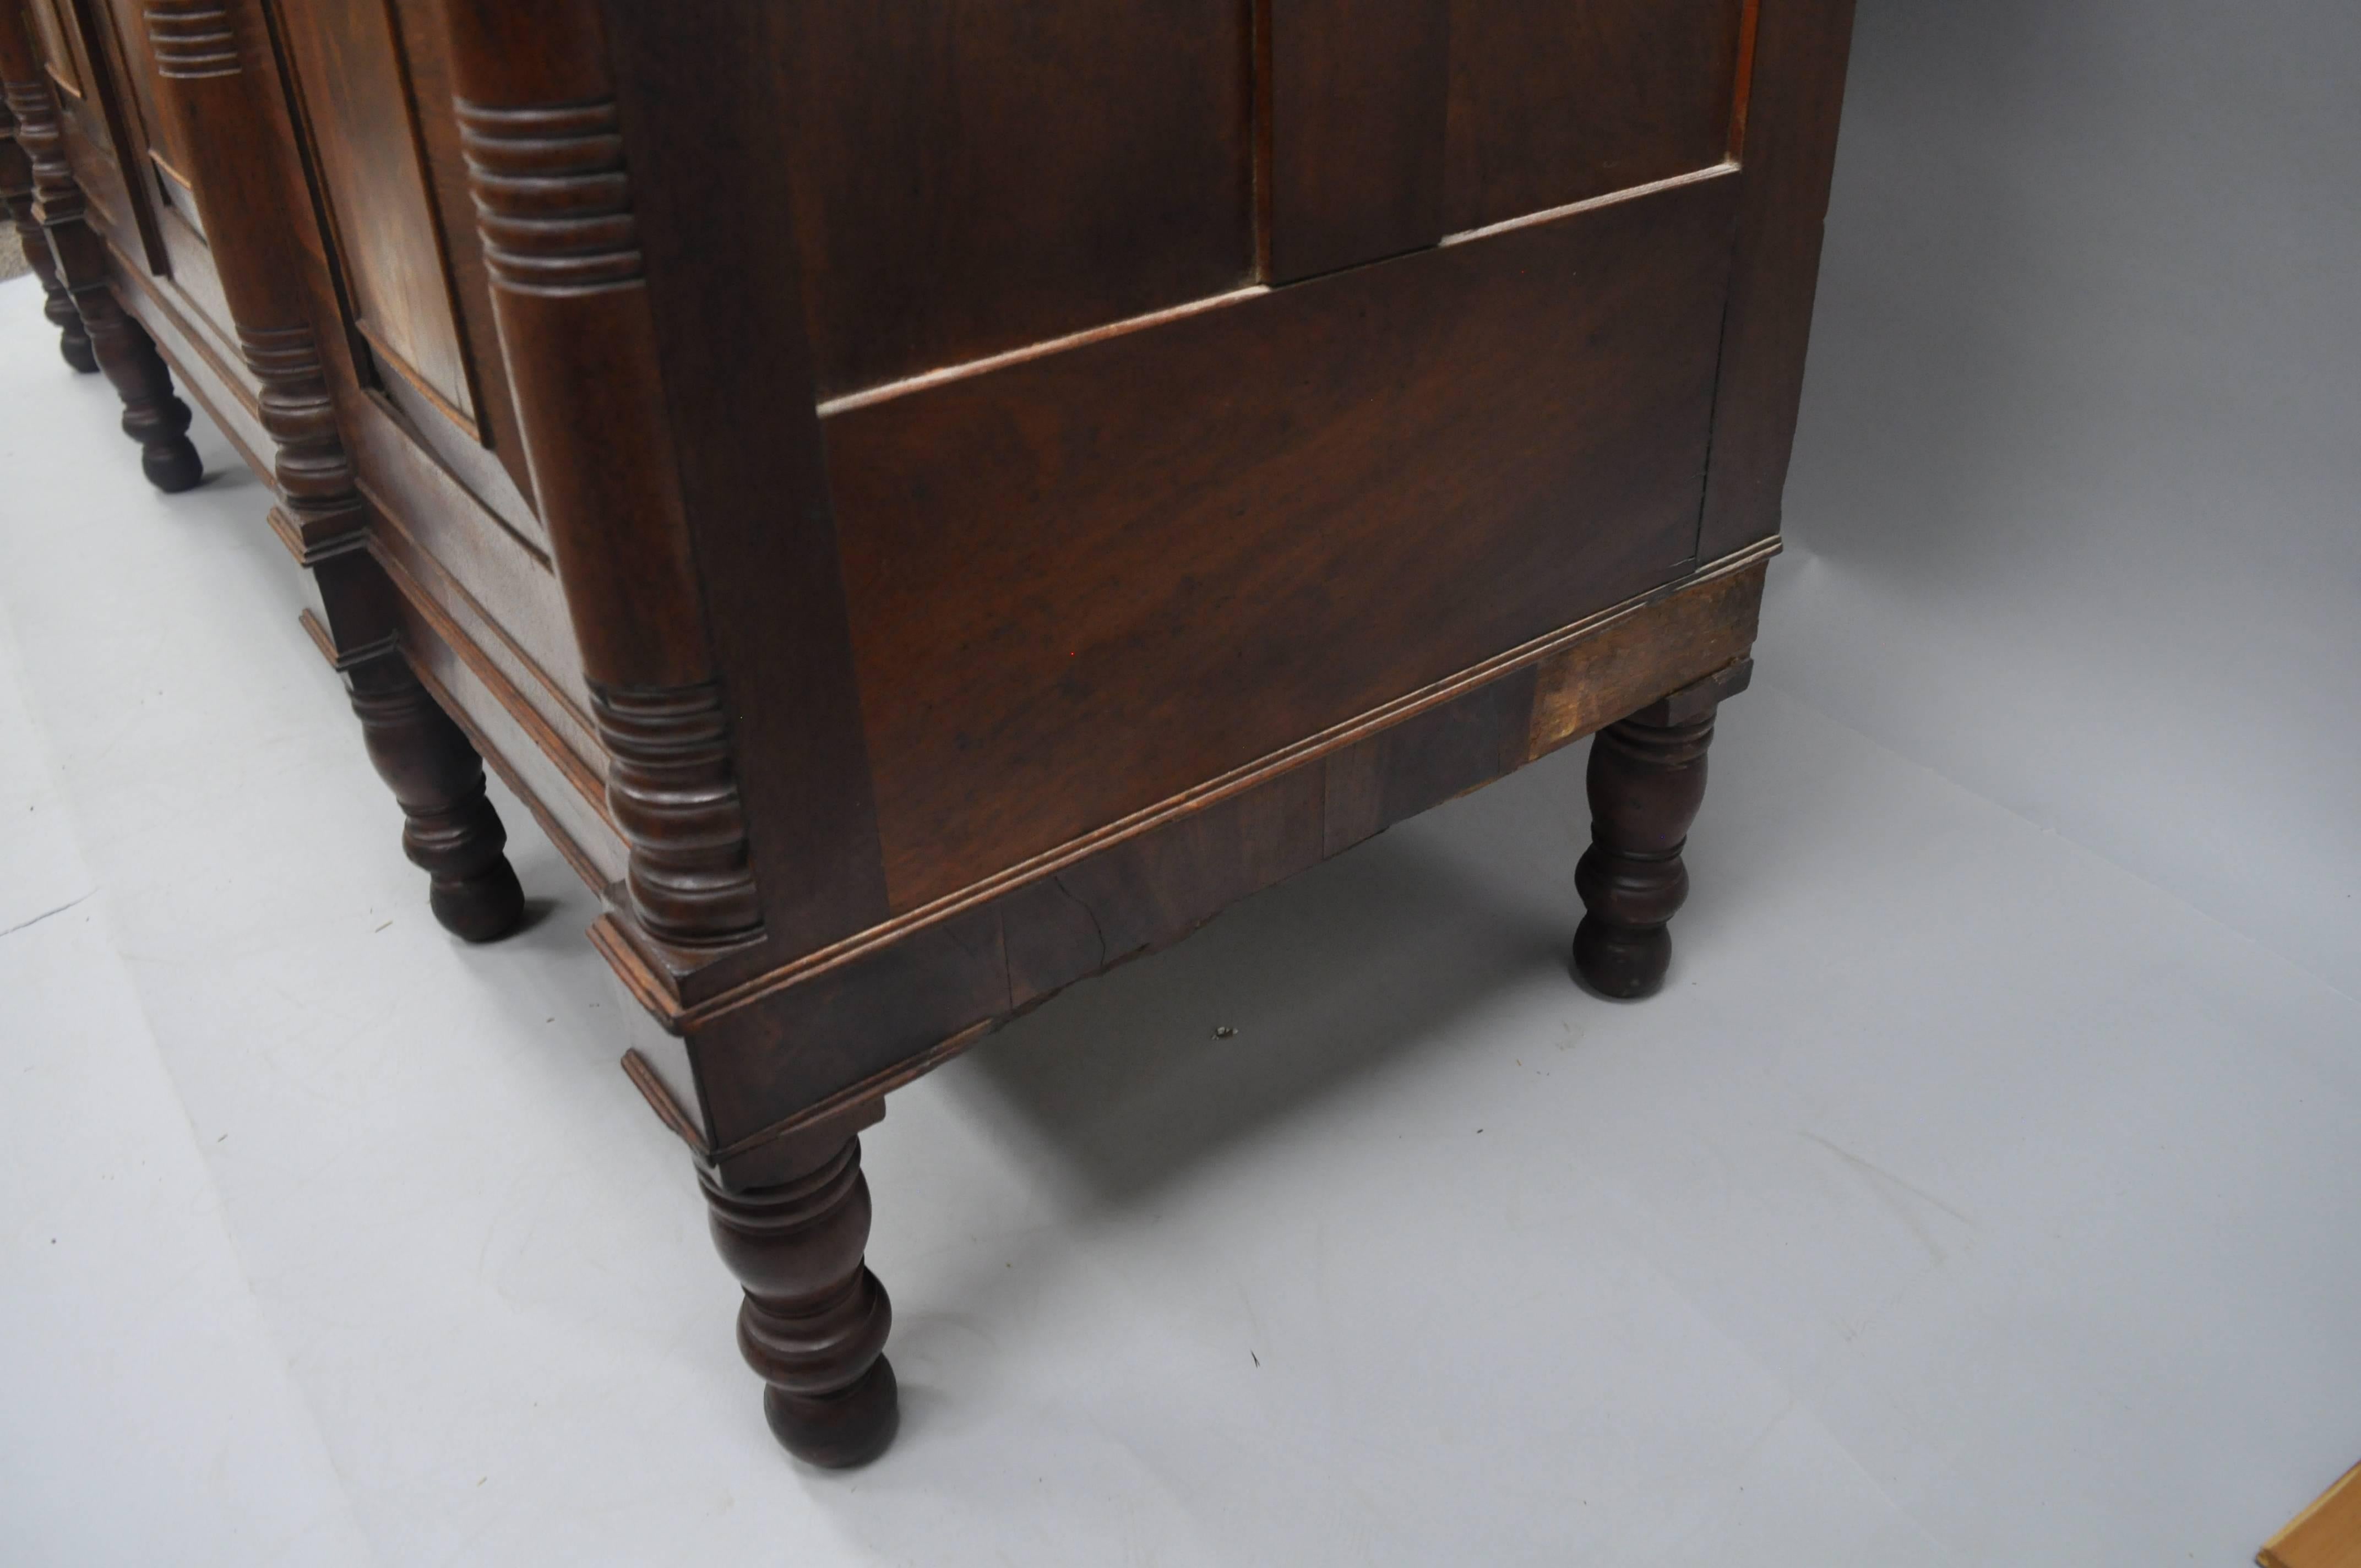 Antique American Empire Sideboard Buffet Crotch Flame Mahogany, circa 1840 In Good Condition For Sale In Philadelphia, PA